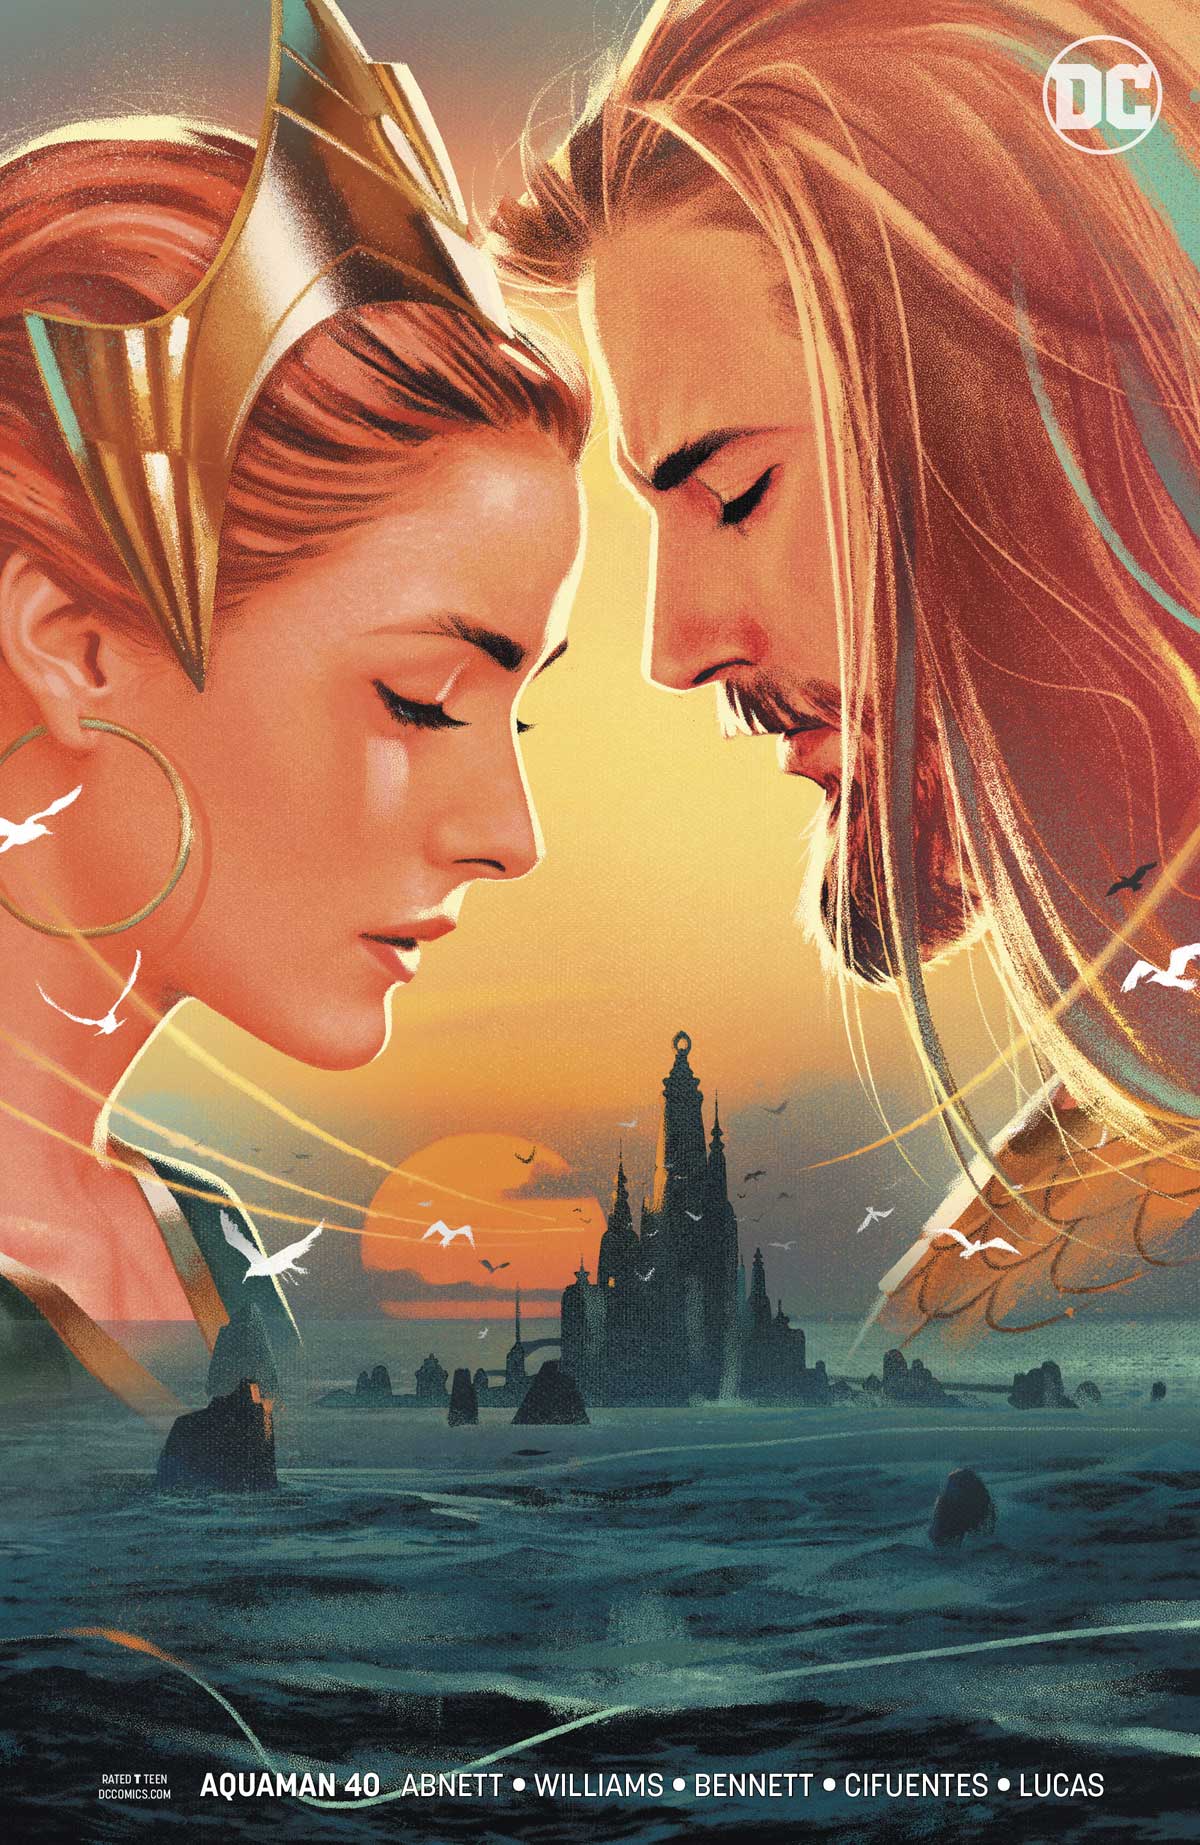 Aquaman variant covers by Joshua Middleton